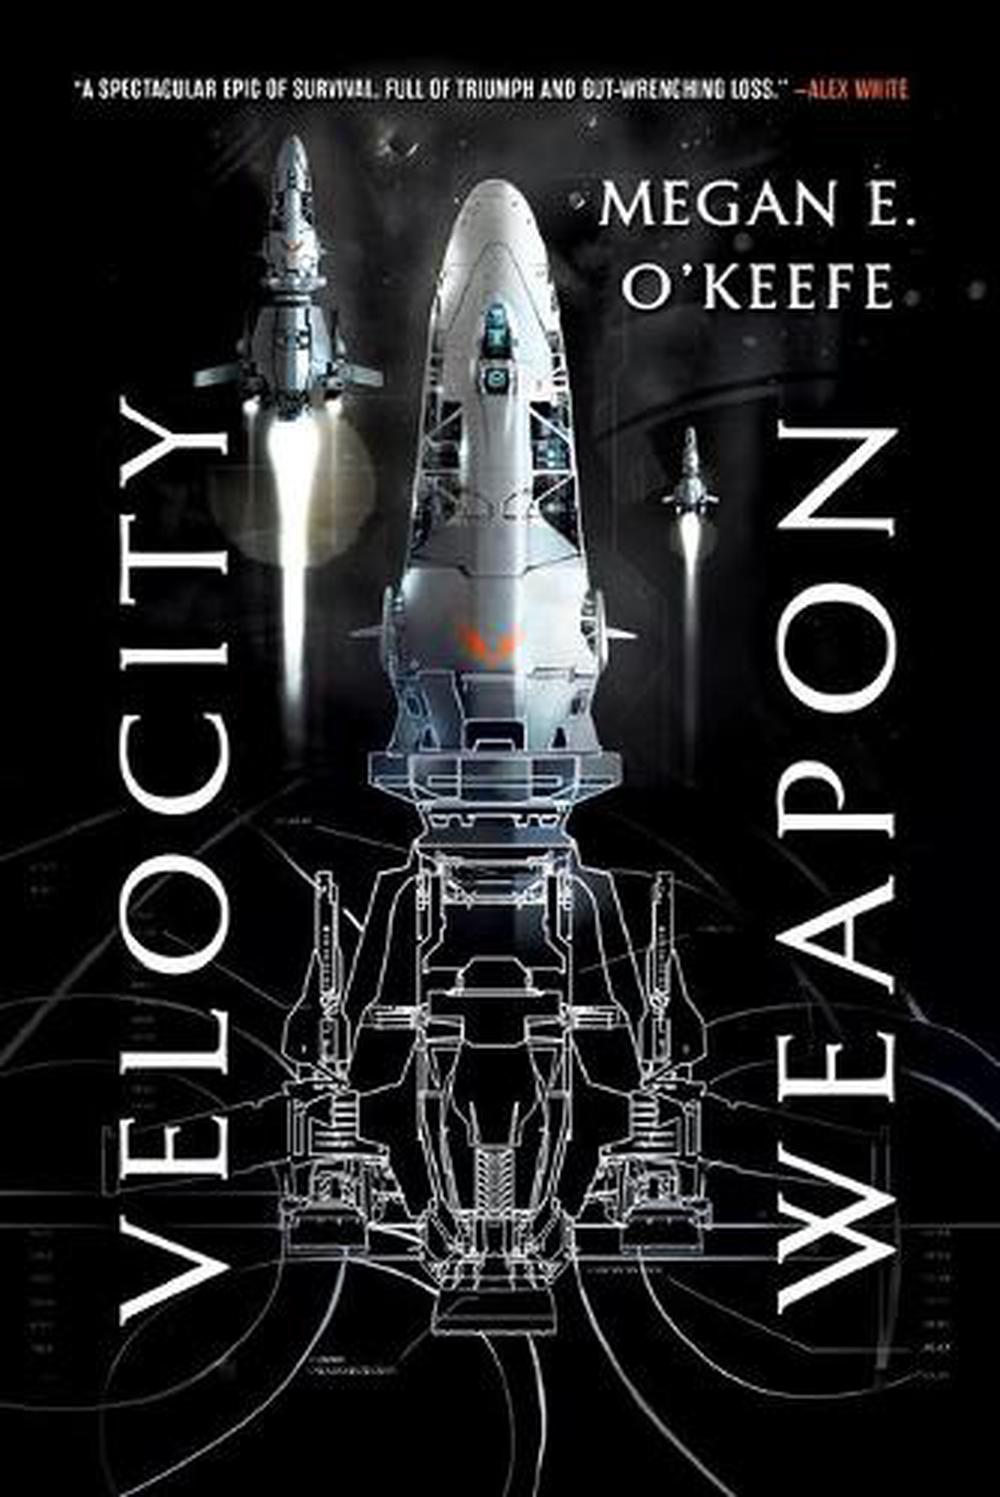 Nile　Buy　Megan　9780316419598　Paperback,　Velocity　Weapon　O'Keefe,　E.　by　The　online　at